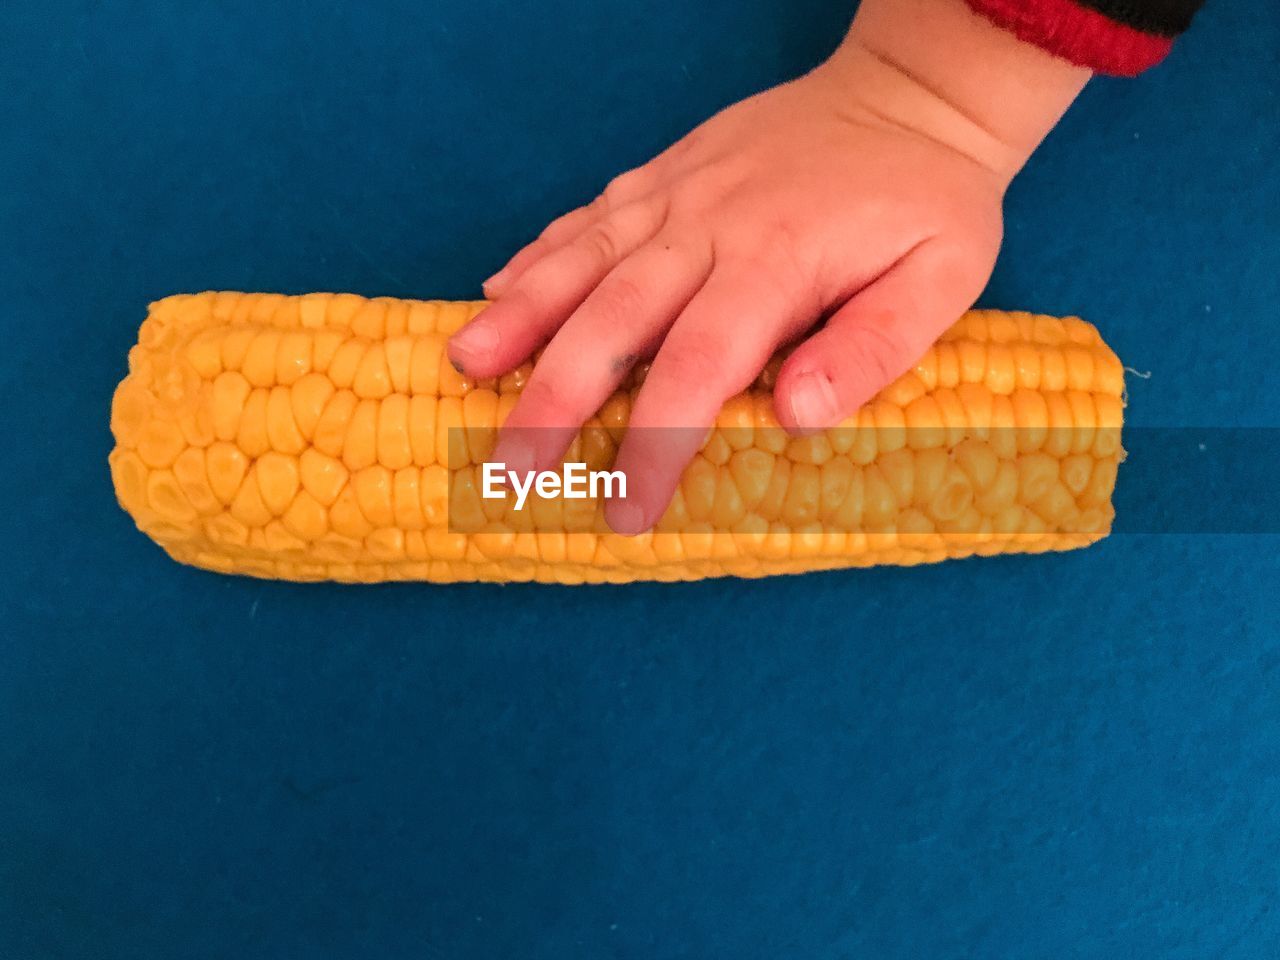 Cropped hand touching sweetcorn on blue table